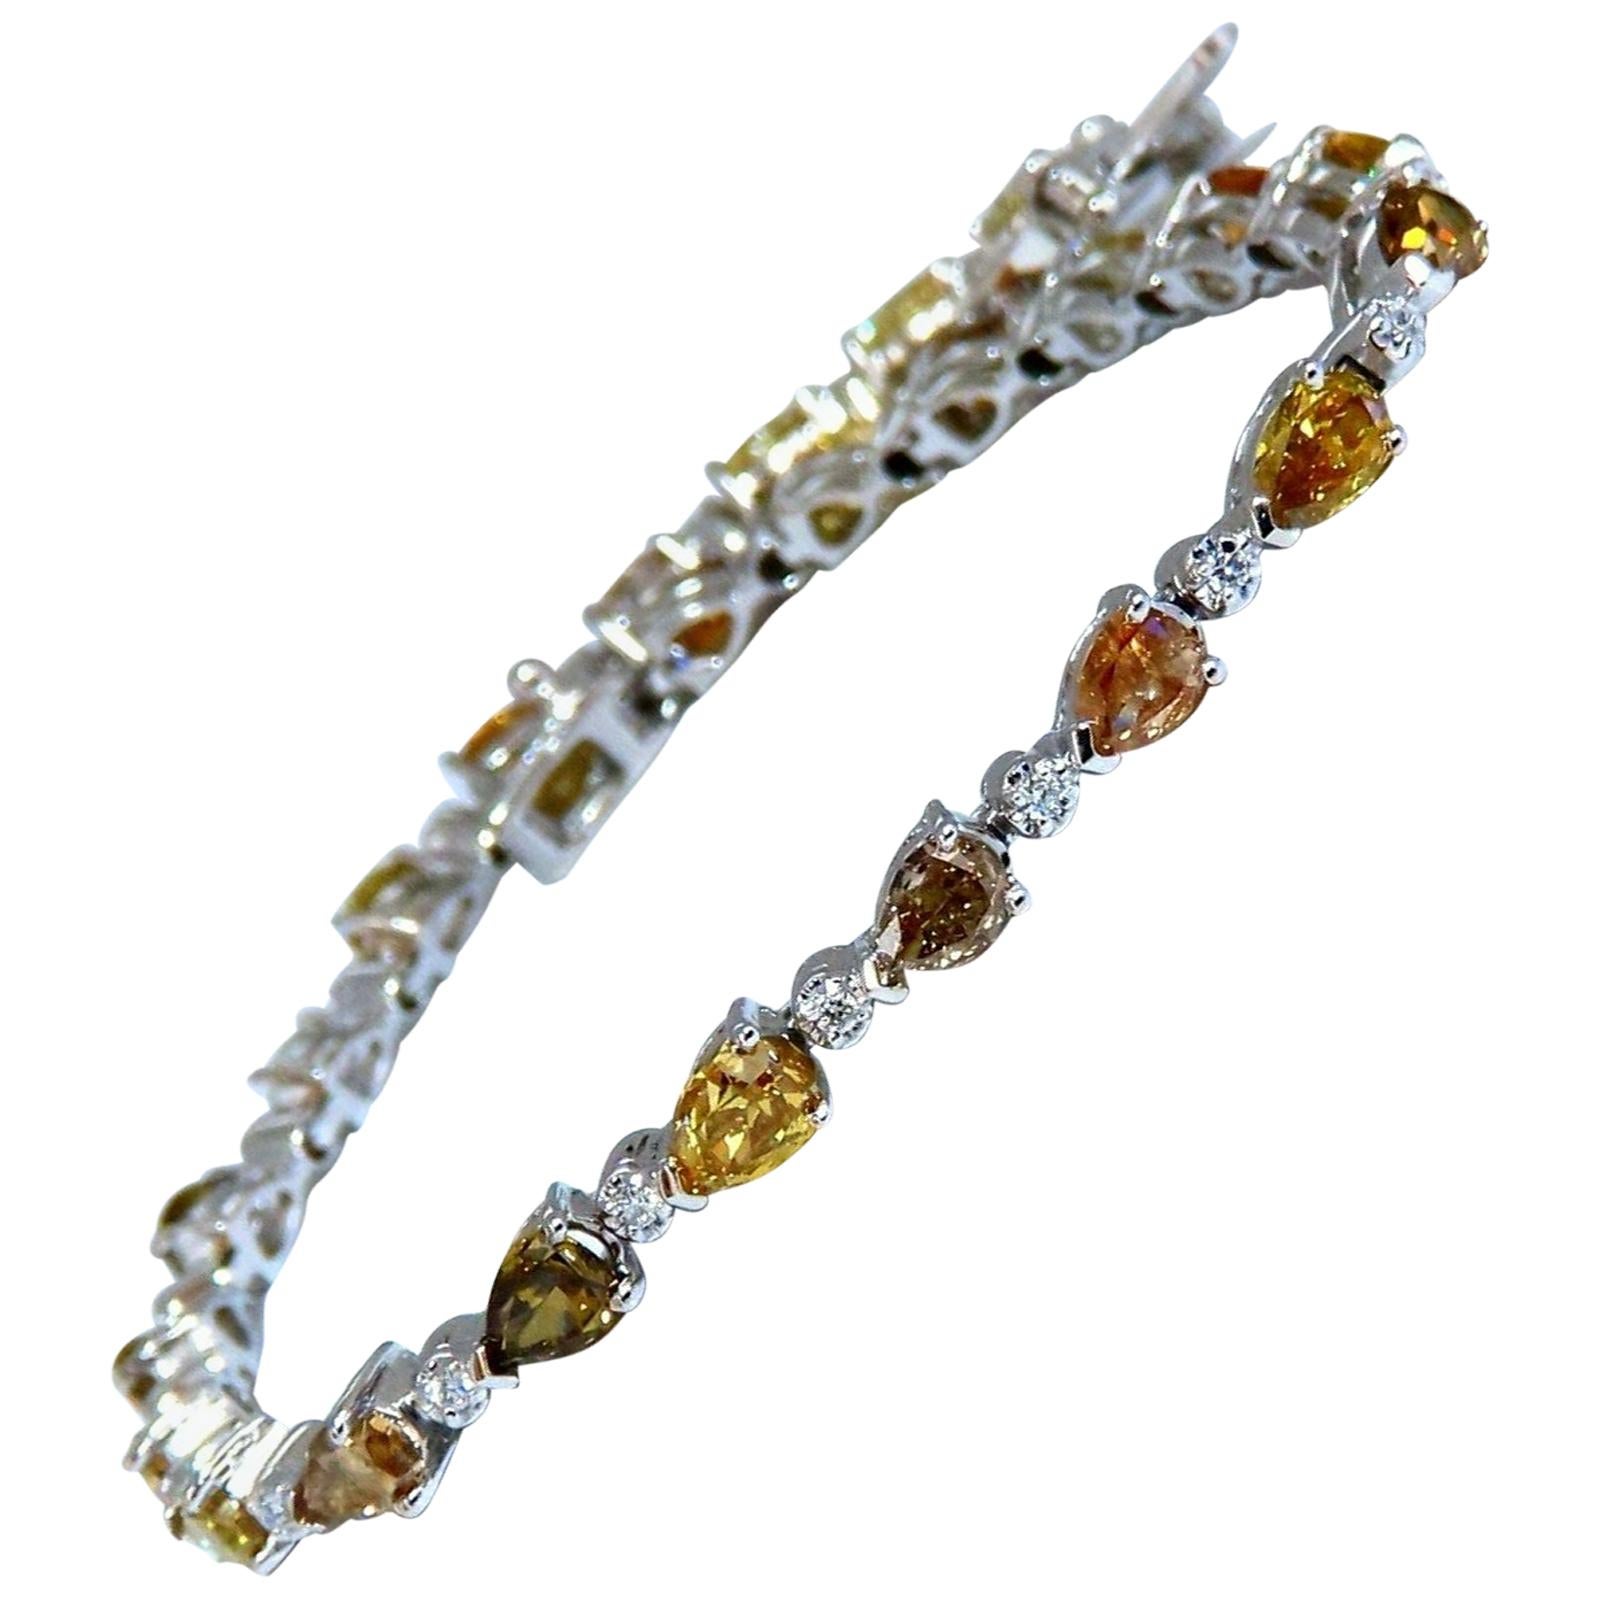 A MAGNIFICENT COLORED DIAMOND AND DIAMOND BRACELET MOUNTED BY CARVIN FRENCH  | Christie's